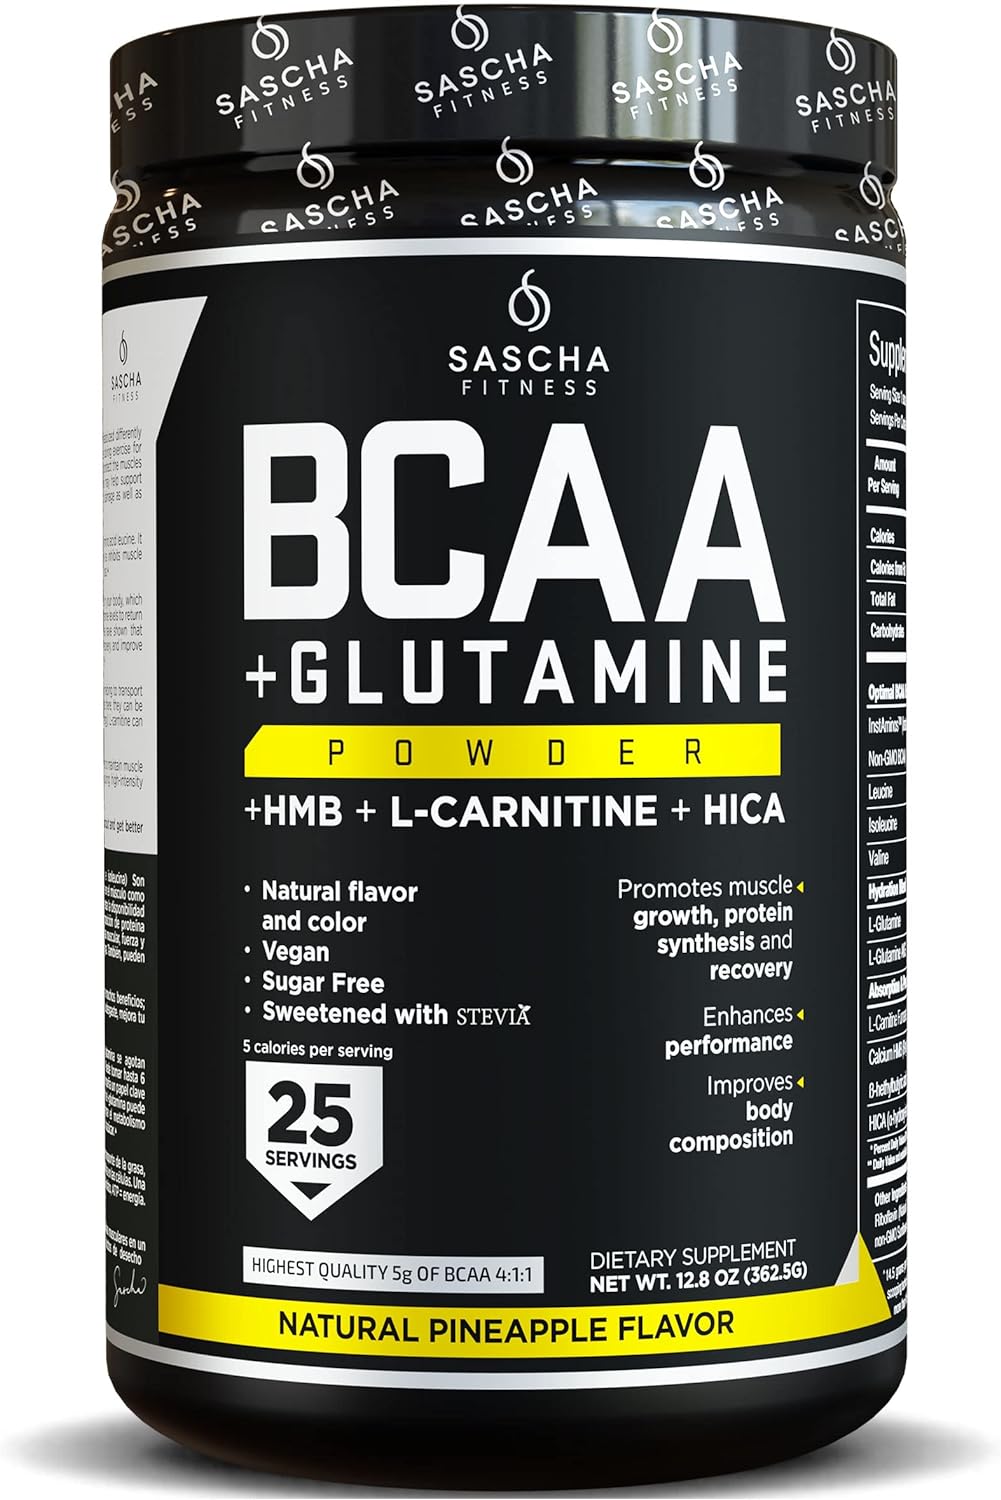 SASCHA FITNESS BCAA 4:1:1 + Glutamine,HMB,L-Carnitine, HICA | Powerful and Instant Powder Blend with Branched Chain Amino Acids (BCAAs) for Pre, Intra and Post-Workout|Natural Pineapple Flavor,362.5g